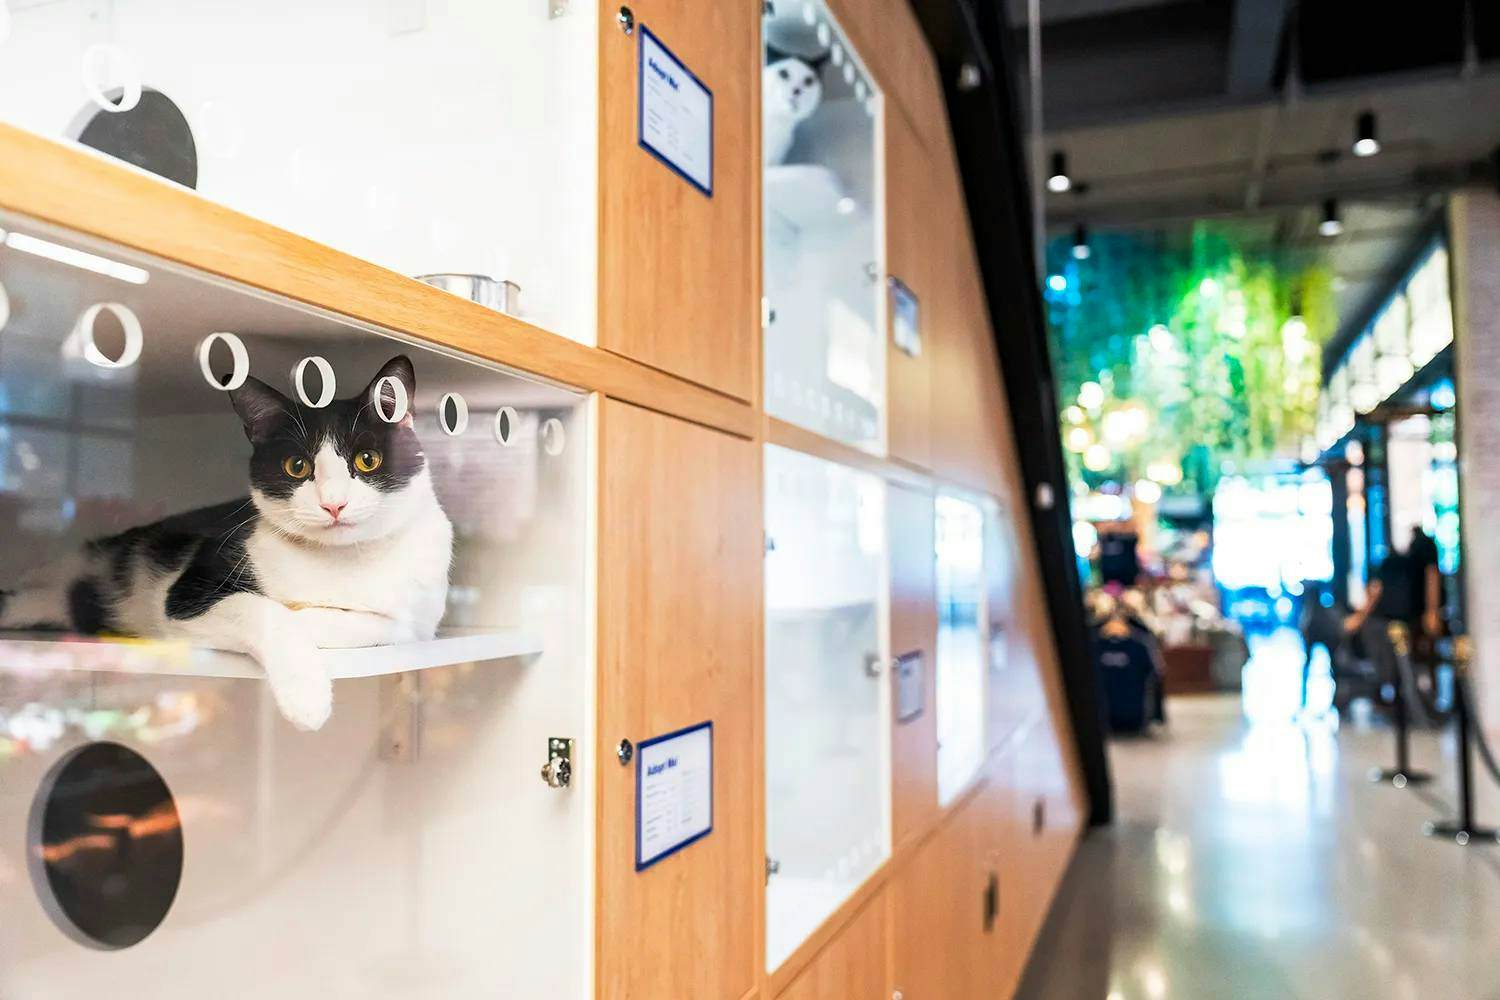 A cat looks out from inside the cat habitat inside Petco’s NYC flagship.